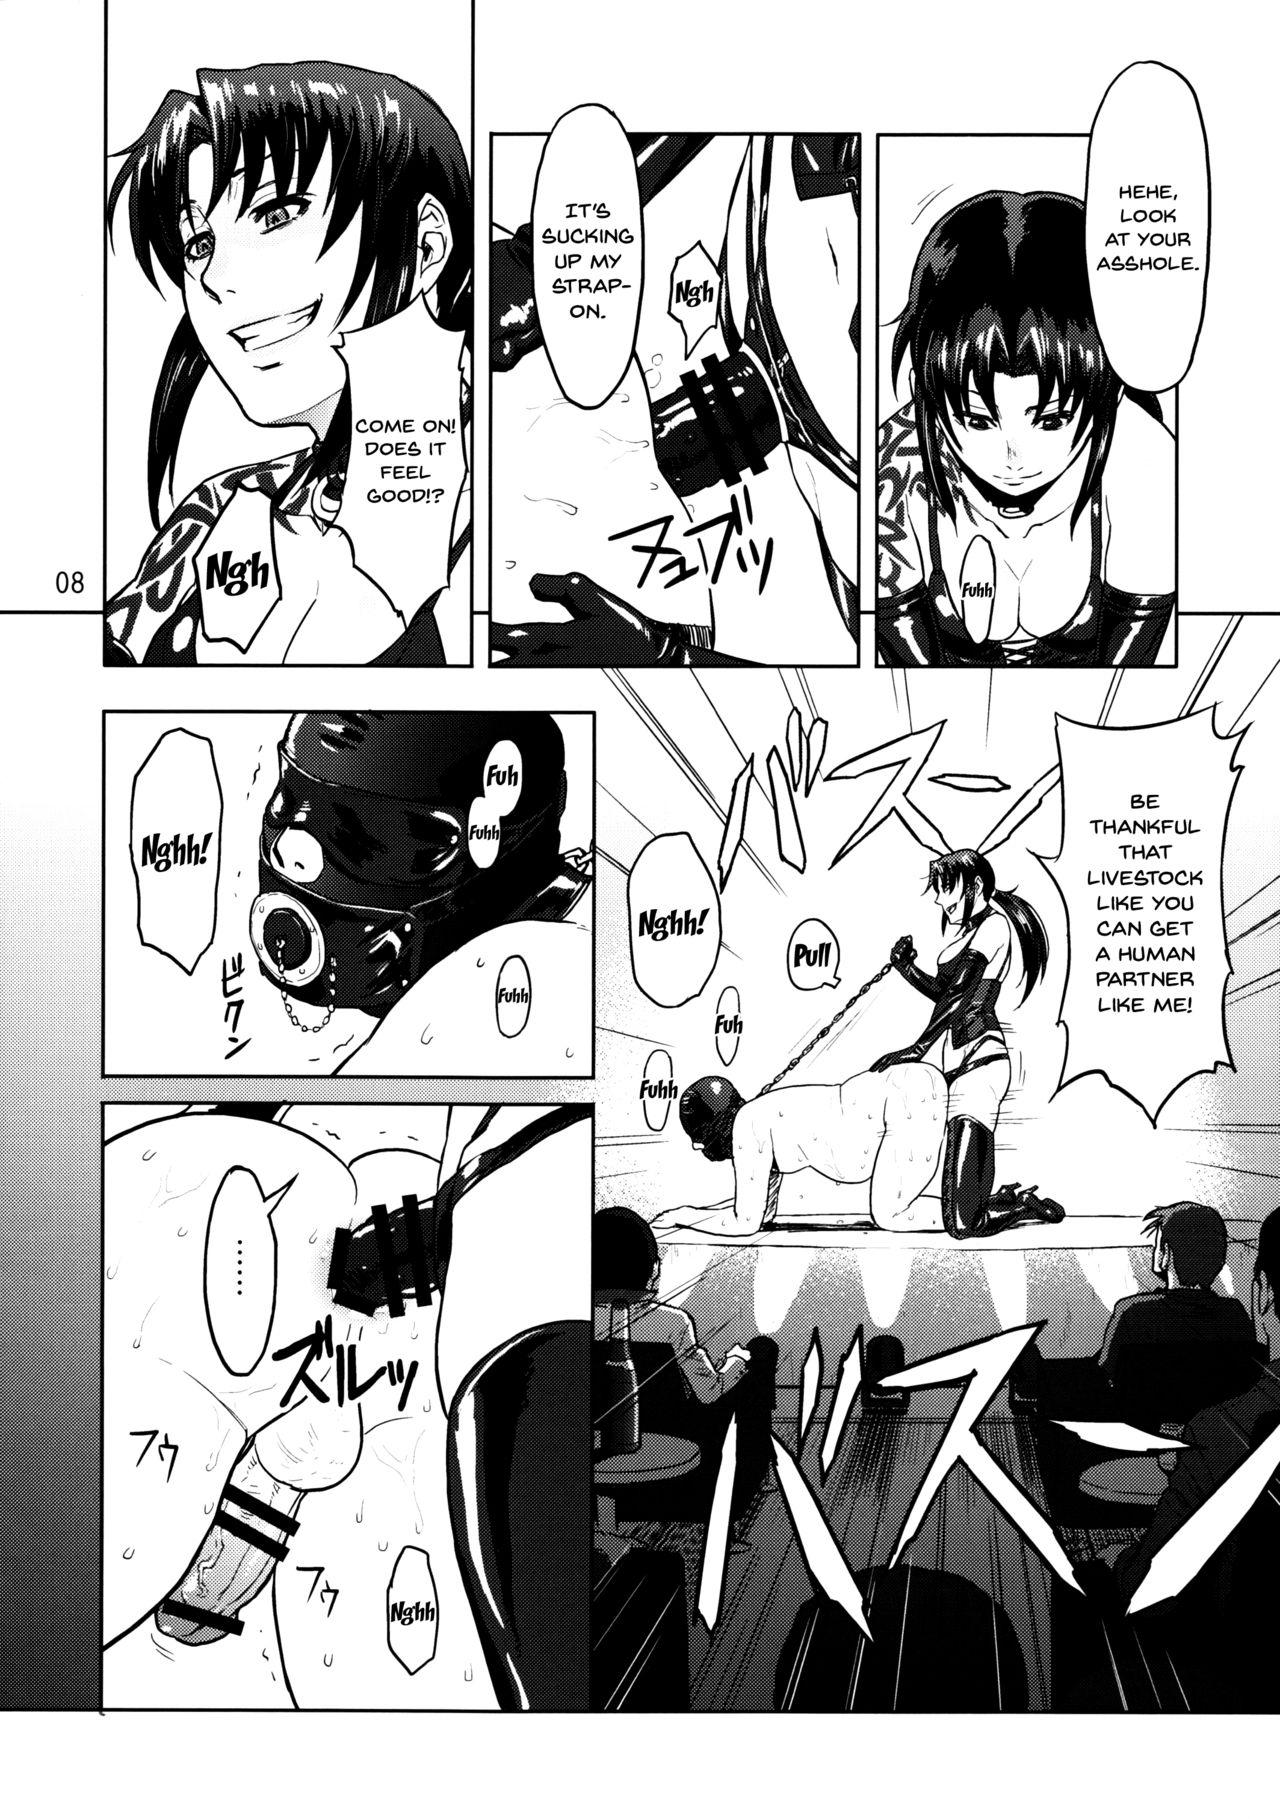 Phat Dressing Room - Black lagoon Consolo - Page 8